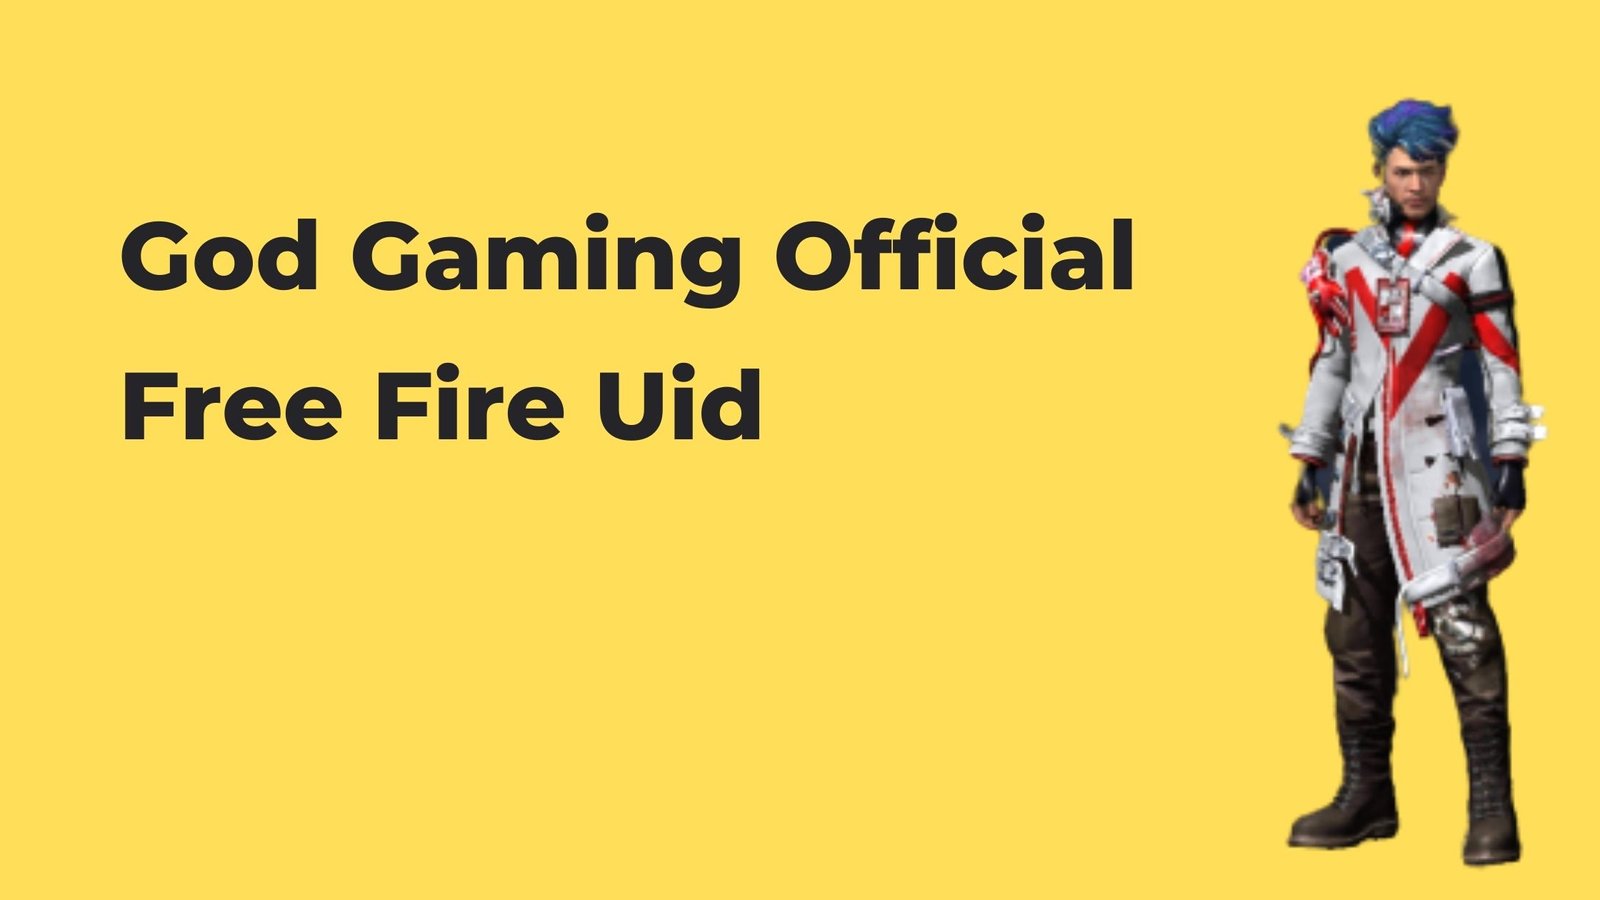 this image has a png photo and text that says god gaming free fire uid